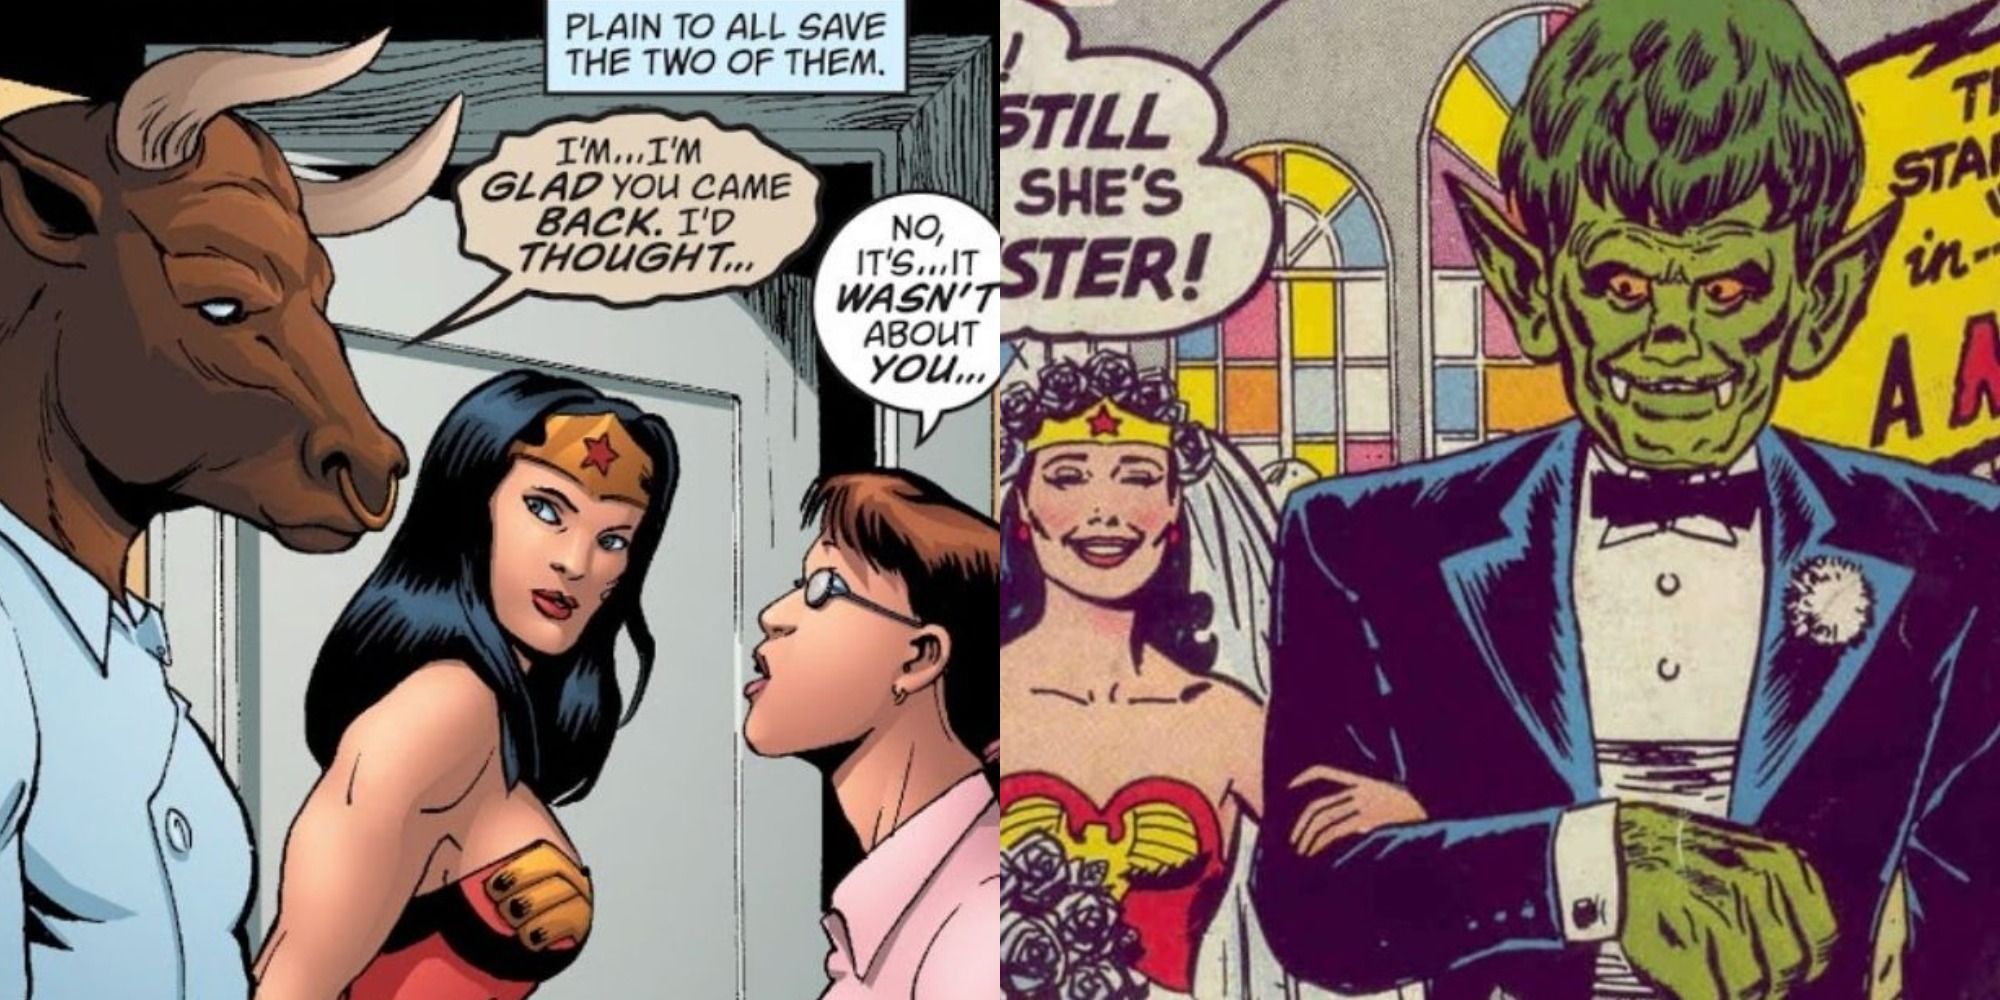 Panels of Wonder Woman comics showing her in between Ferdinand and Leslie Anderson and getting married to Mister Monster